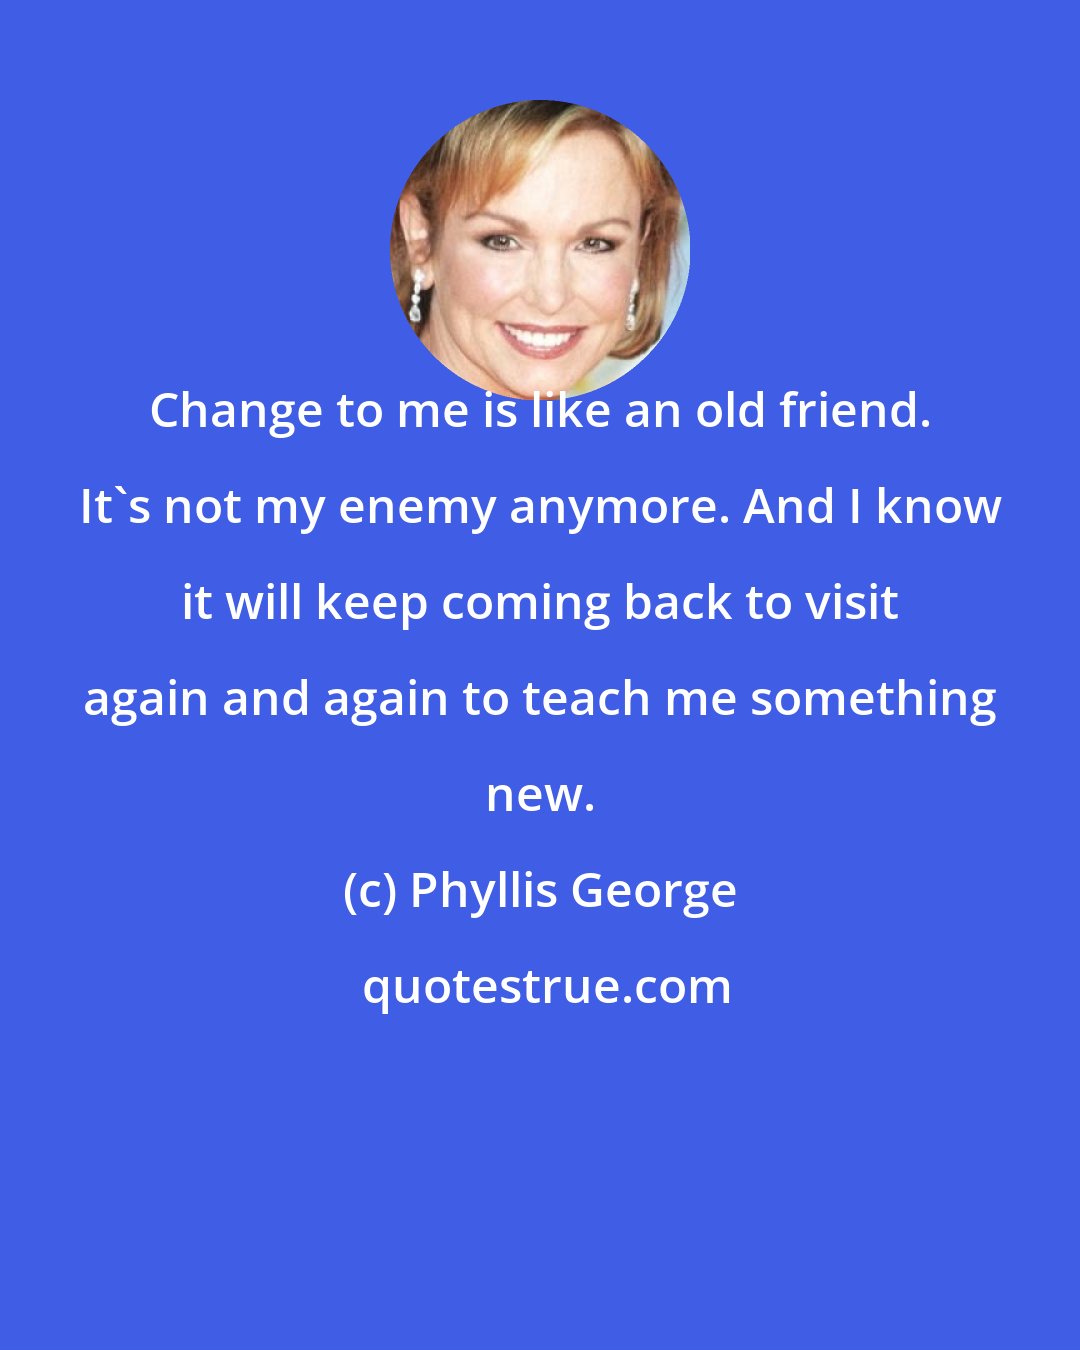 Phyllis George: Change to me is like an old friend. It's not my enemy anymore. And I know it will keep coming back to visit again and again to teach me something new.